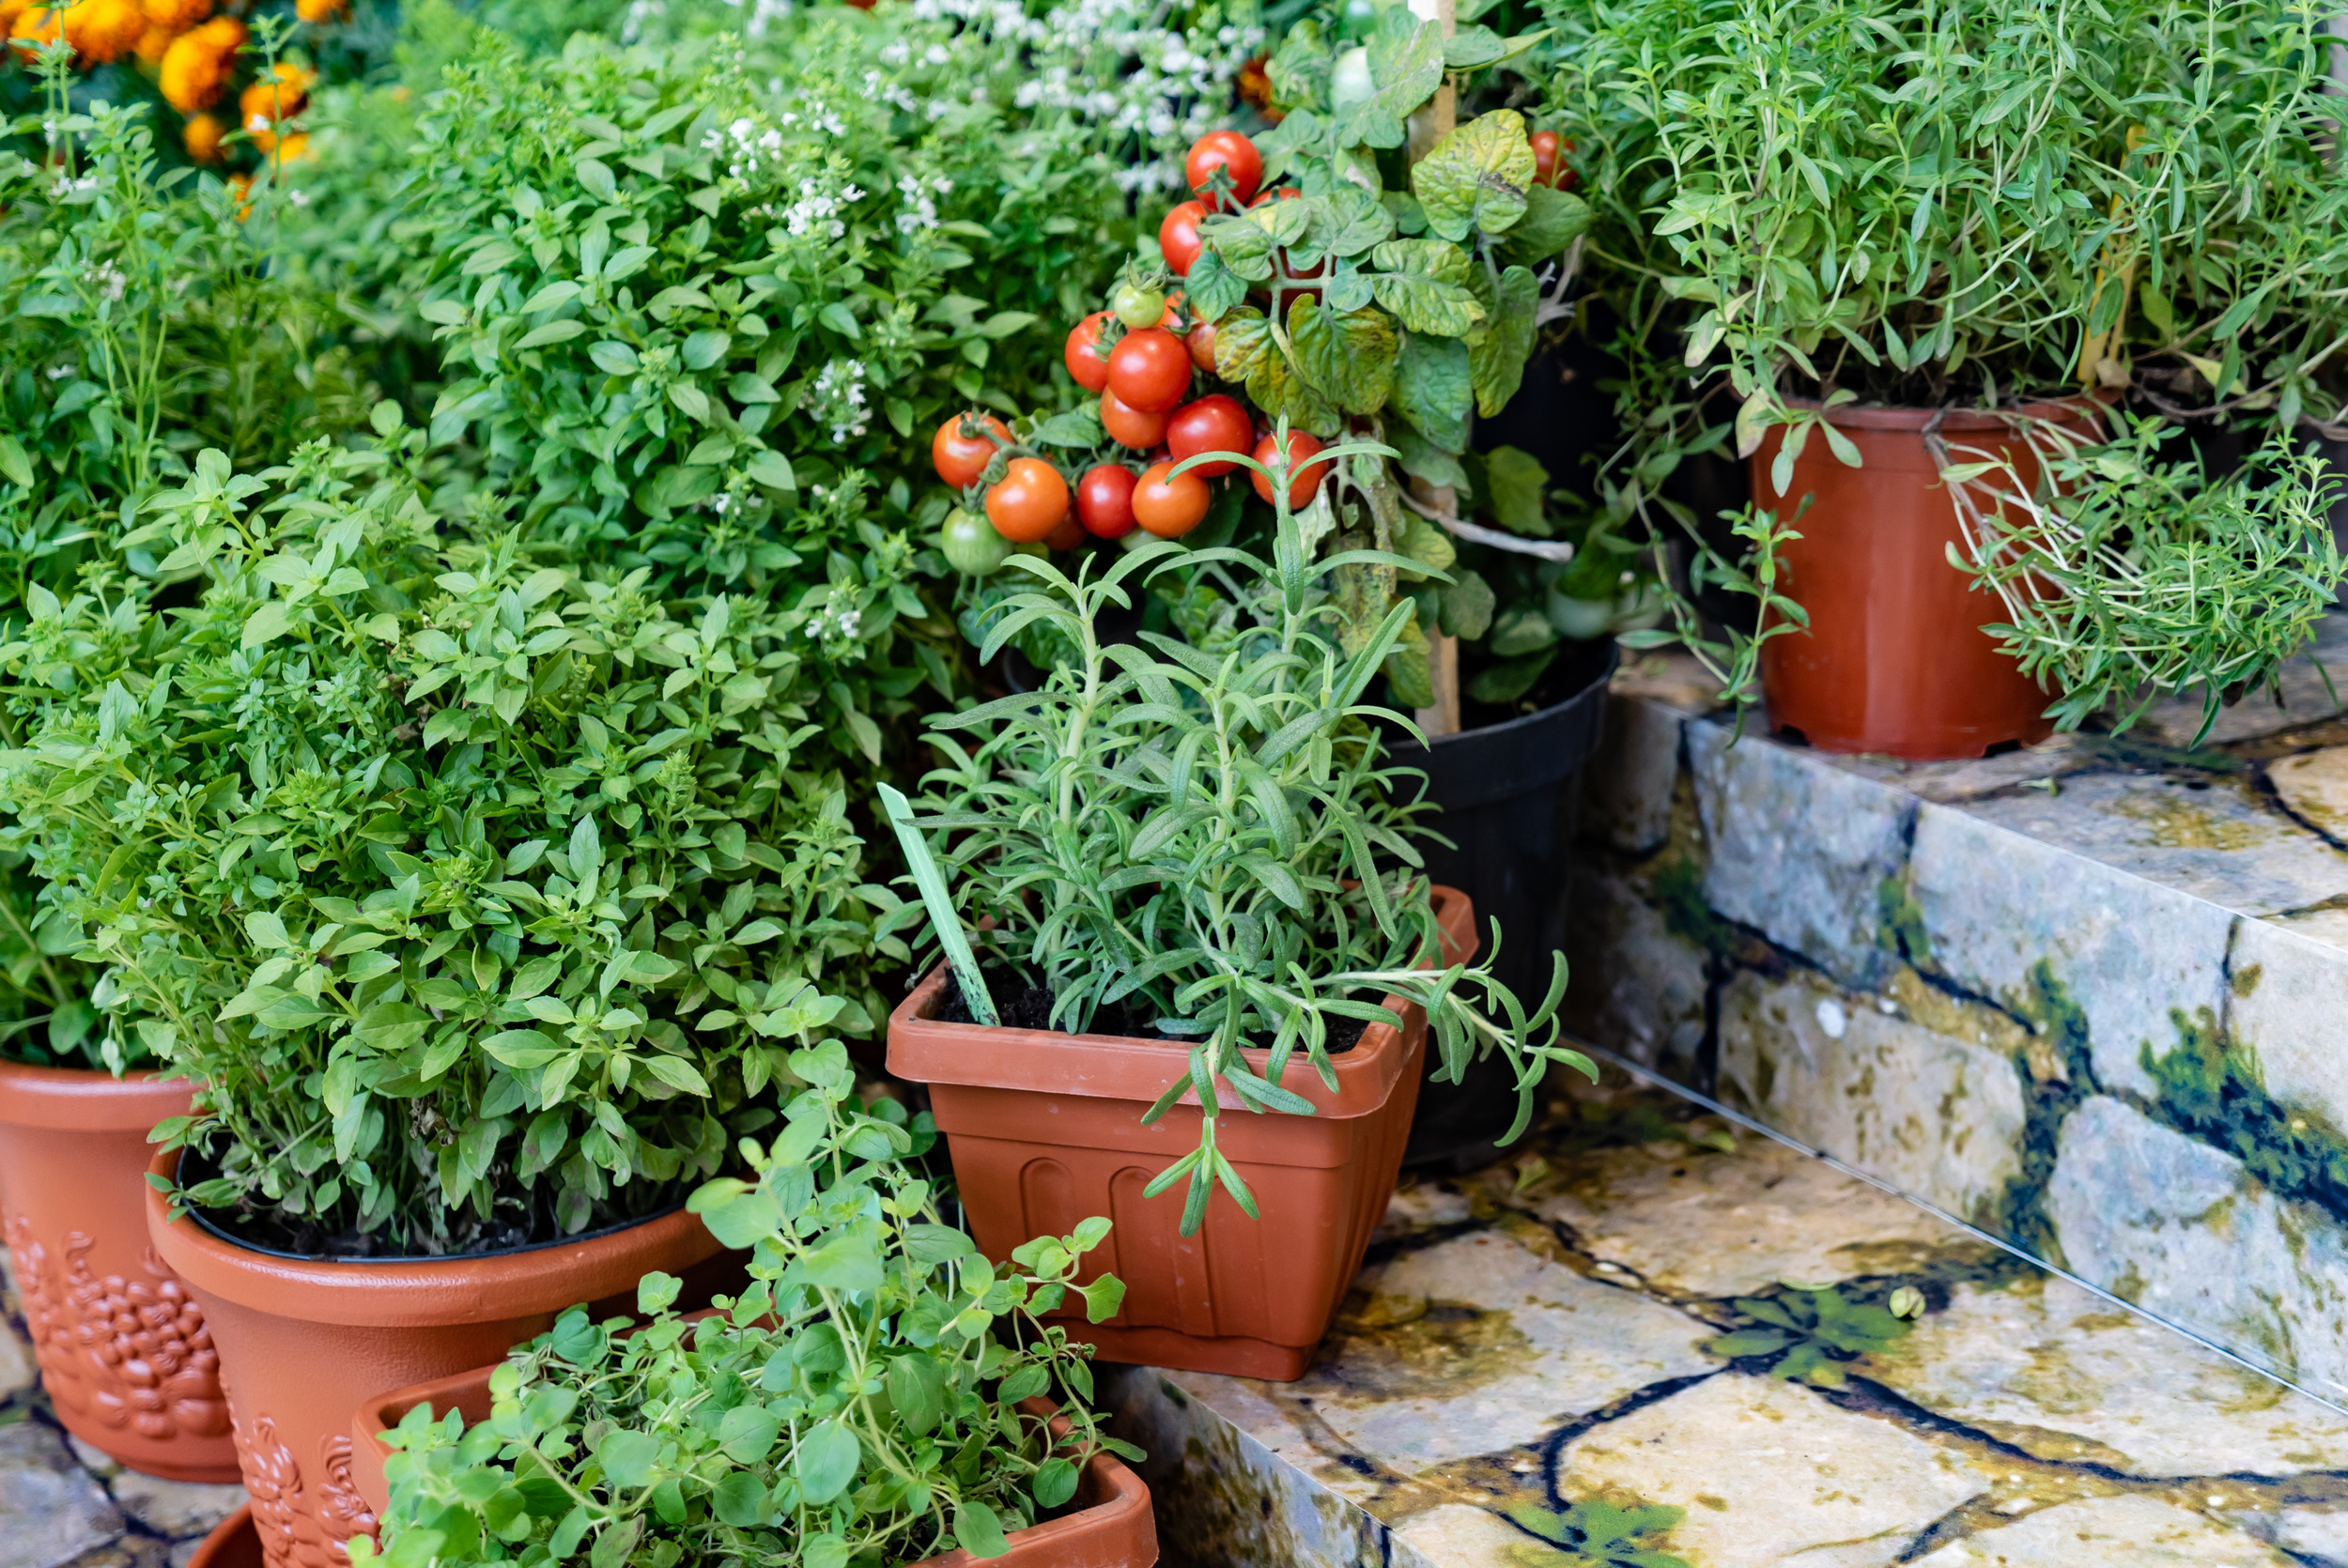 <p>There's nothing more satisfying than growing your own food, even when you've only got a tiny apartment balcony garden. Start small with an herb garden or a few buckets of tomatoes to find what works best for your space, then consider more involved set-ups like DIY vertical gardens. </p><p>You may also like: <a href='https://www.yardbarker.com/lifestyle/articles/25_last_minute_fourth_of_july_party_recipes/s1__24278863'>25 last-minute Fourth of July party recipes</a></p>